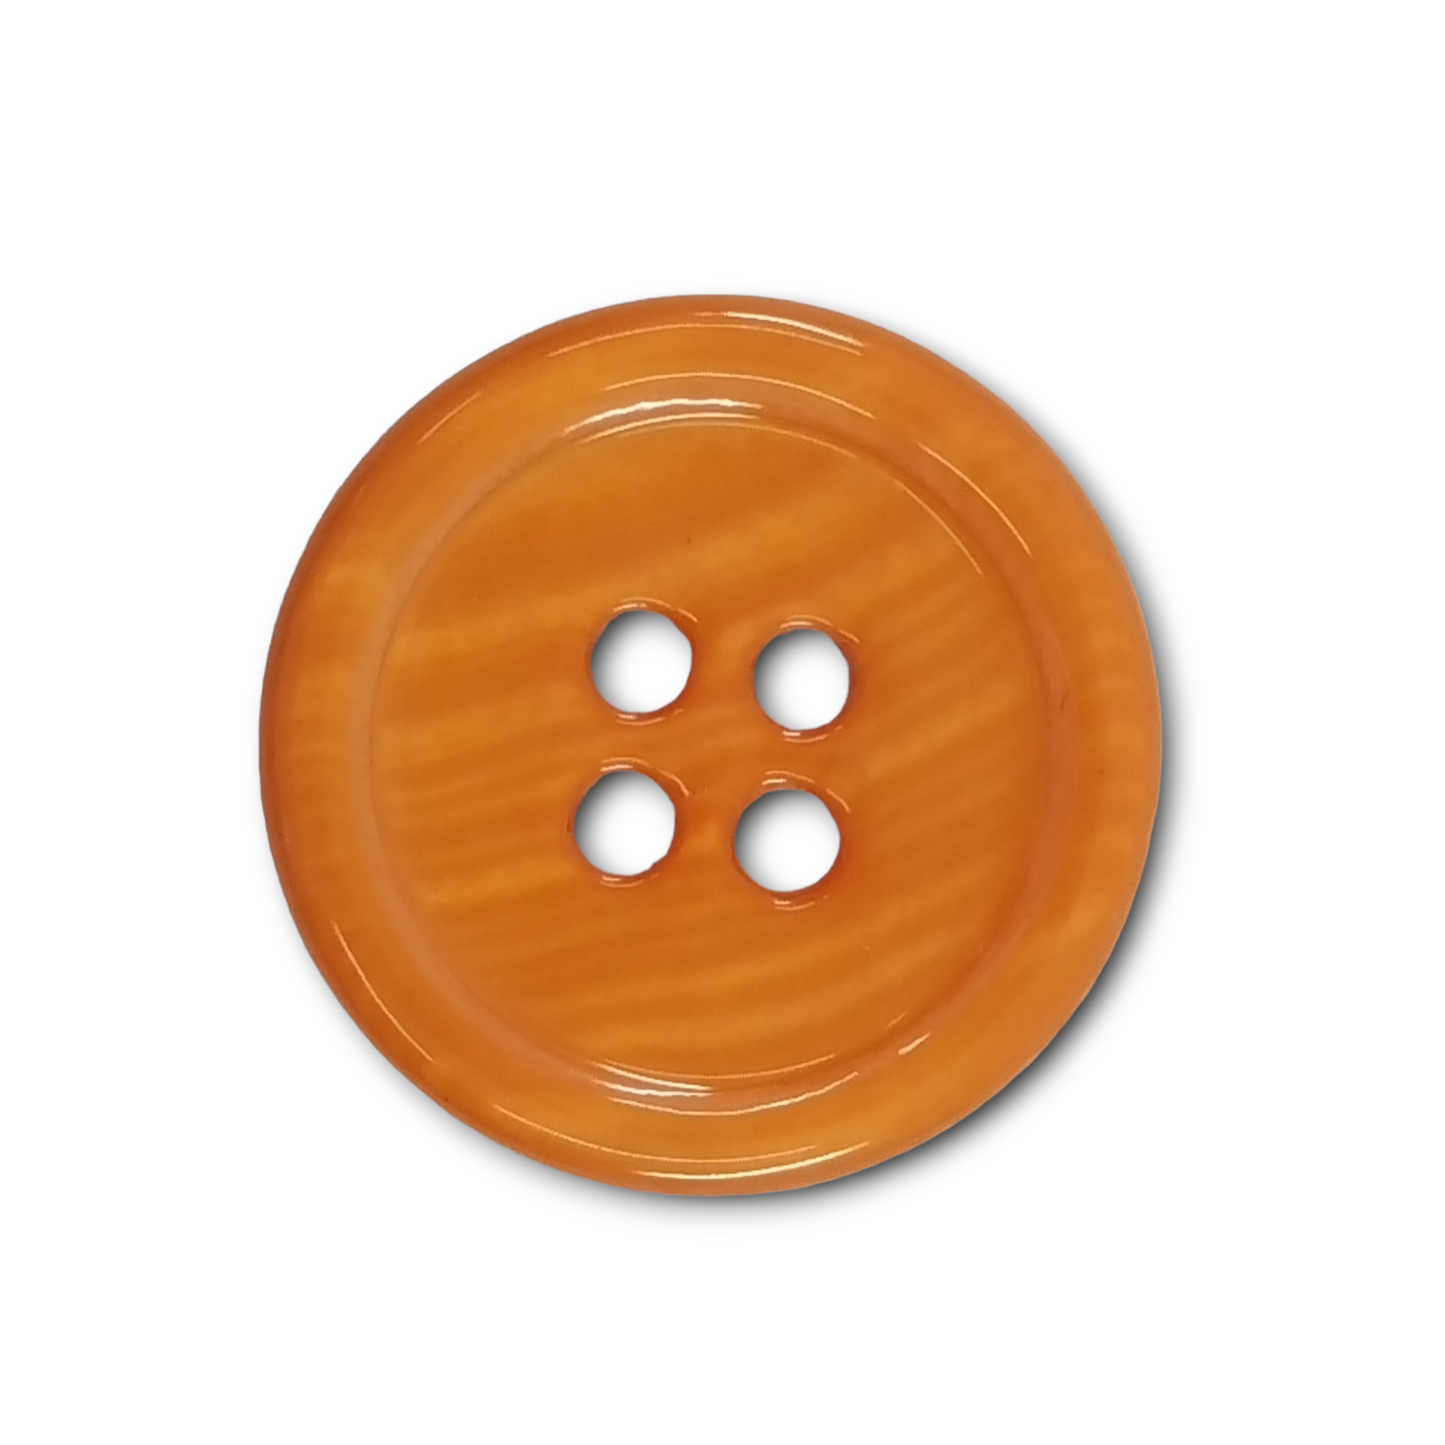 Mother of pearl buttons for men in many colors for jackets and suits